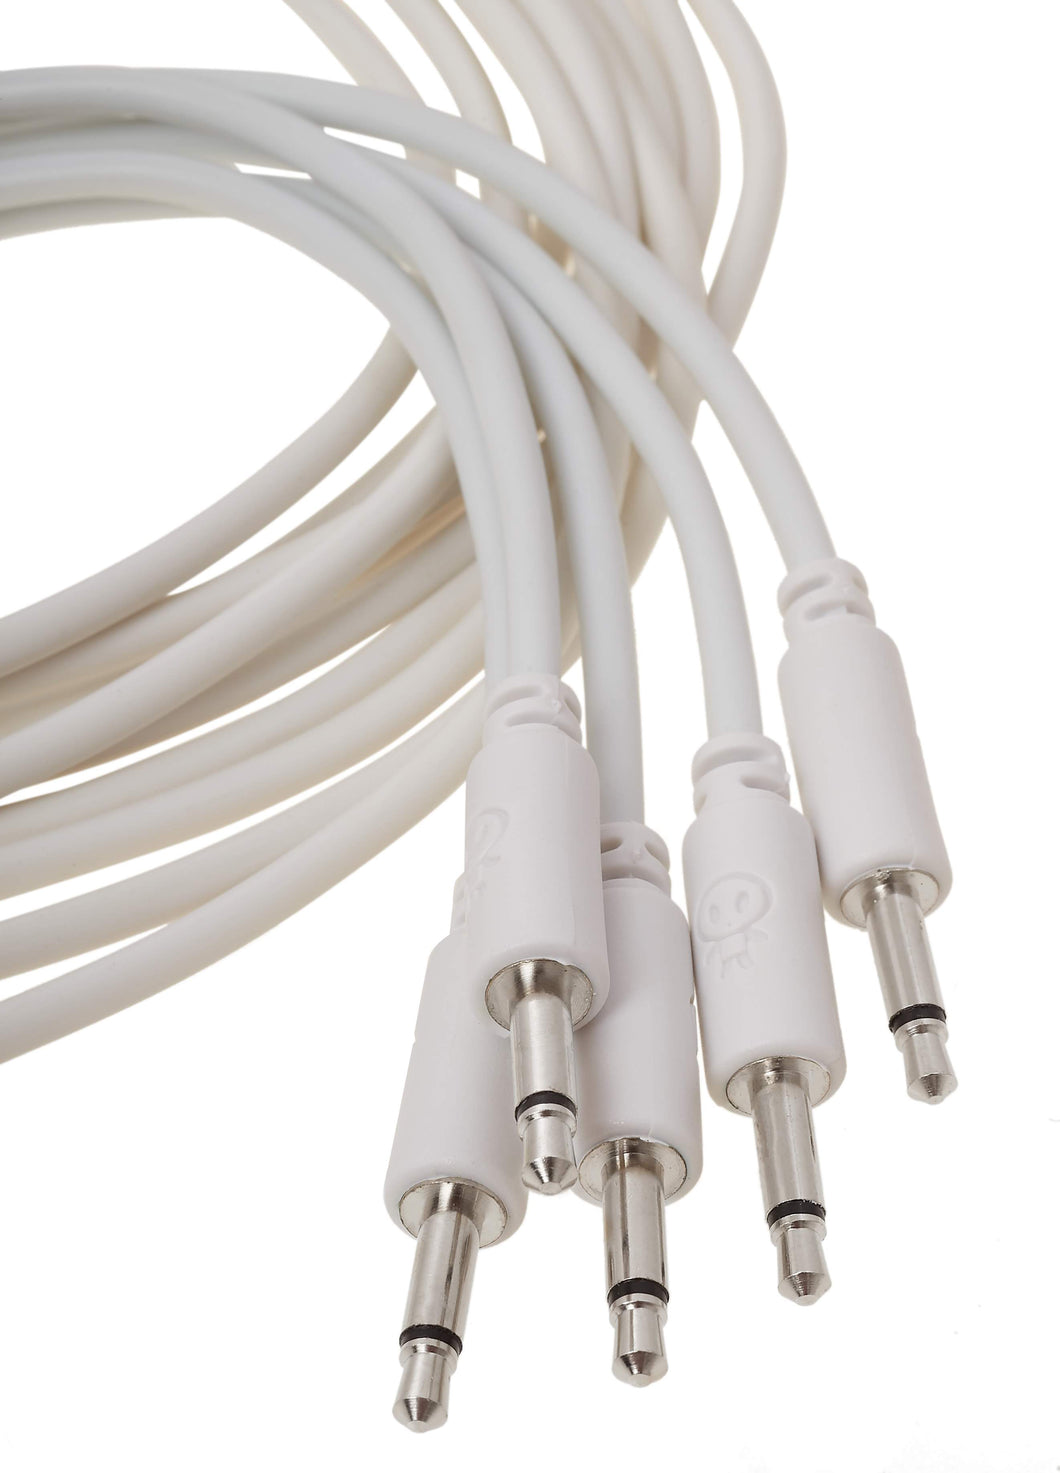 Erica Synths 20cm White Patch Cables x 5